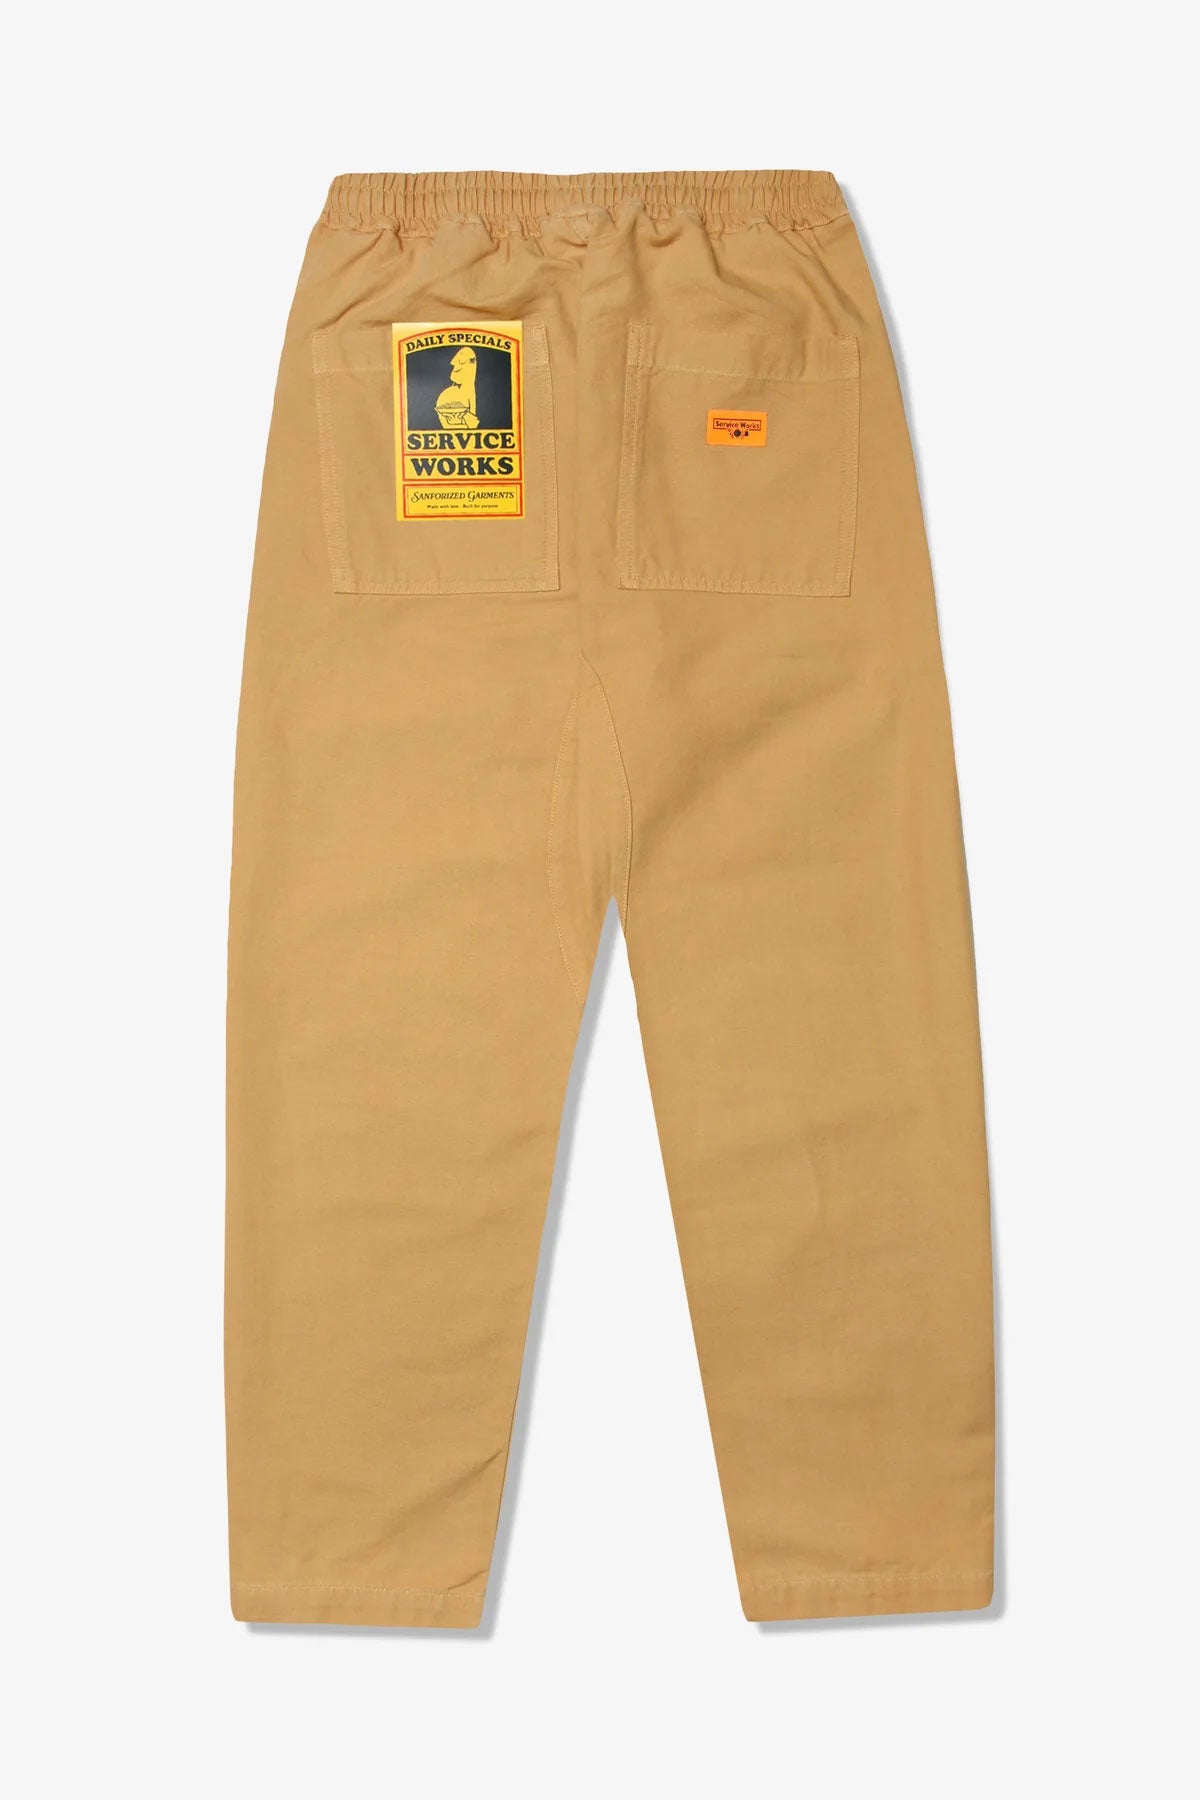 Service Works - Classic Canvas Chef Pants in Tan